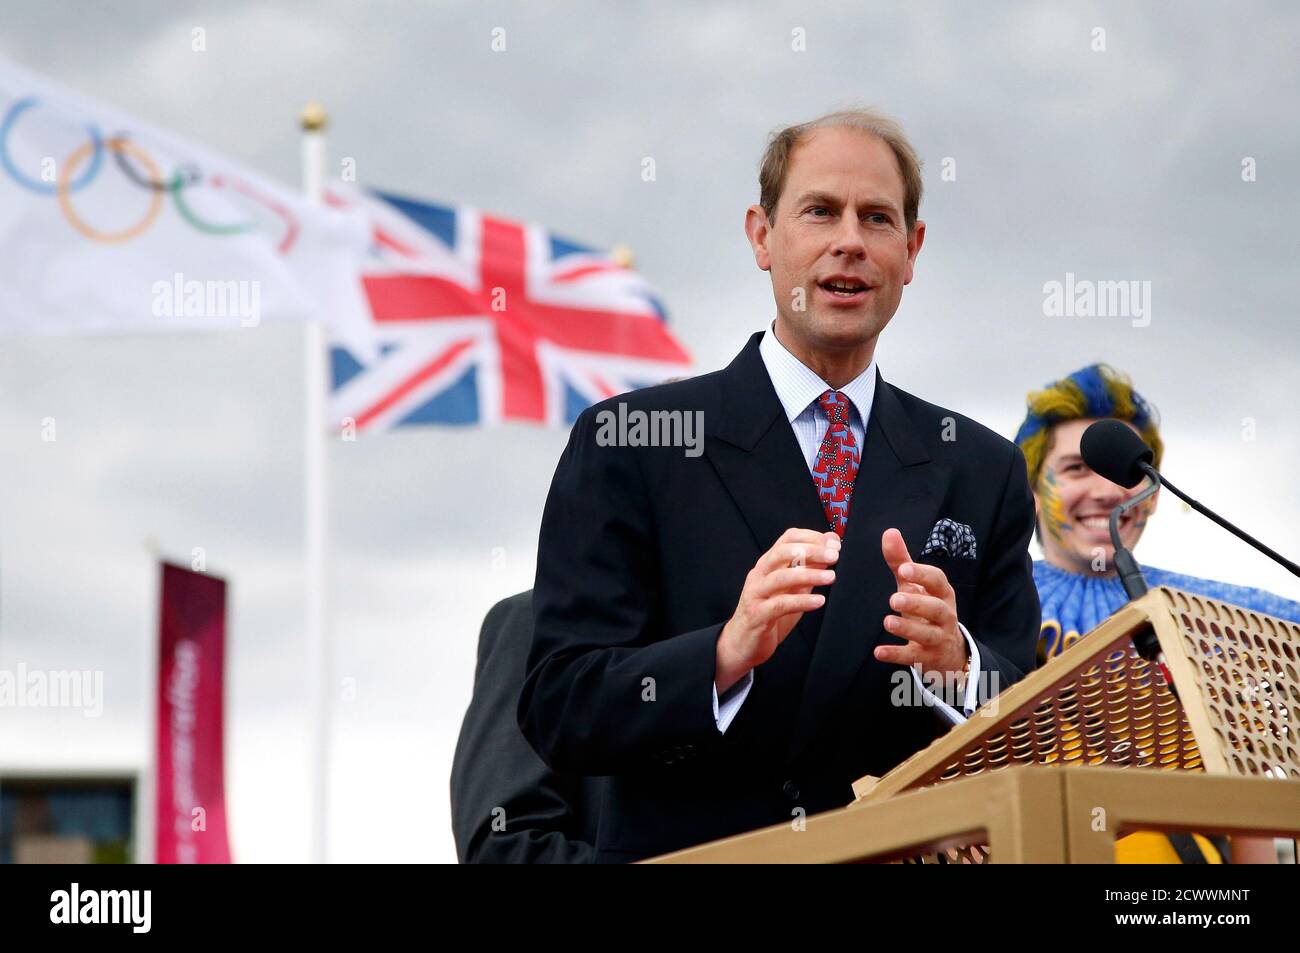 Britain's Prince Edward speaks during the Olympic Team Welcome Ceremony at the Athletes' Village at the Olympic Park in London, July 19, 2012.    REUTERS/Jae C. Hong/Pool (BRITAIN - Tags: SPORT OLYMPICS ROYALS) Stock Photo